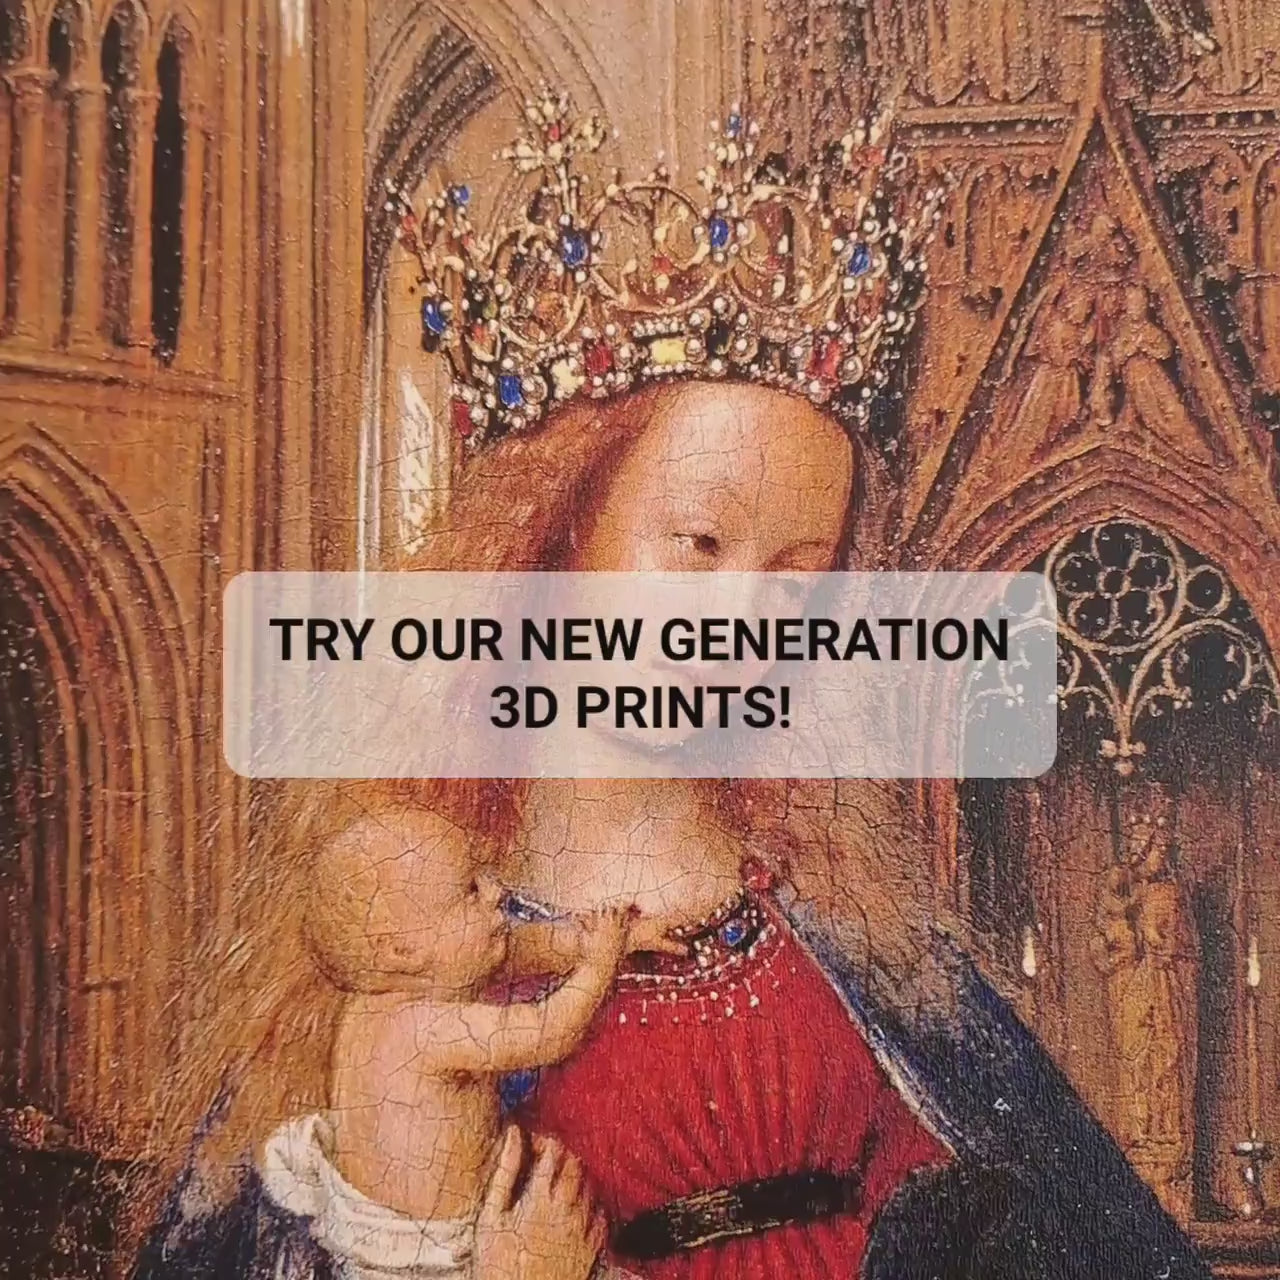 The Madonna in the Church by Jan van Eyck, 3d Printed with texture and brush strokes looks like original oil-painting, code:093